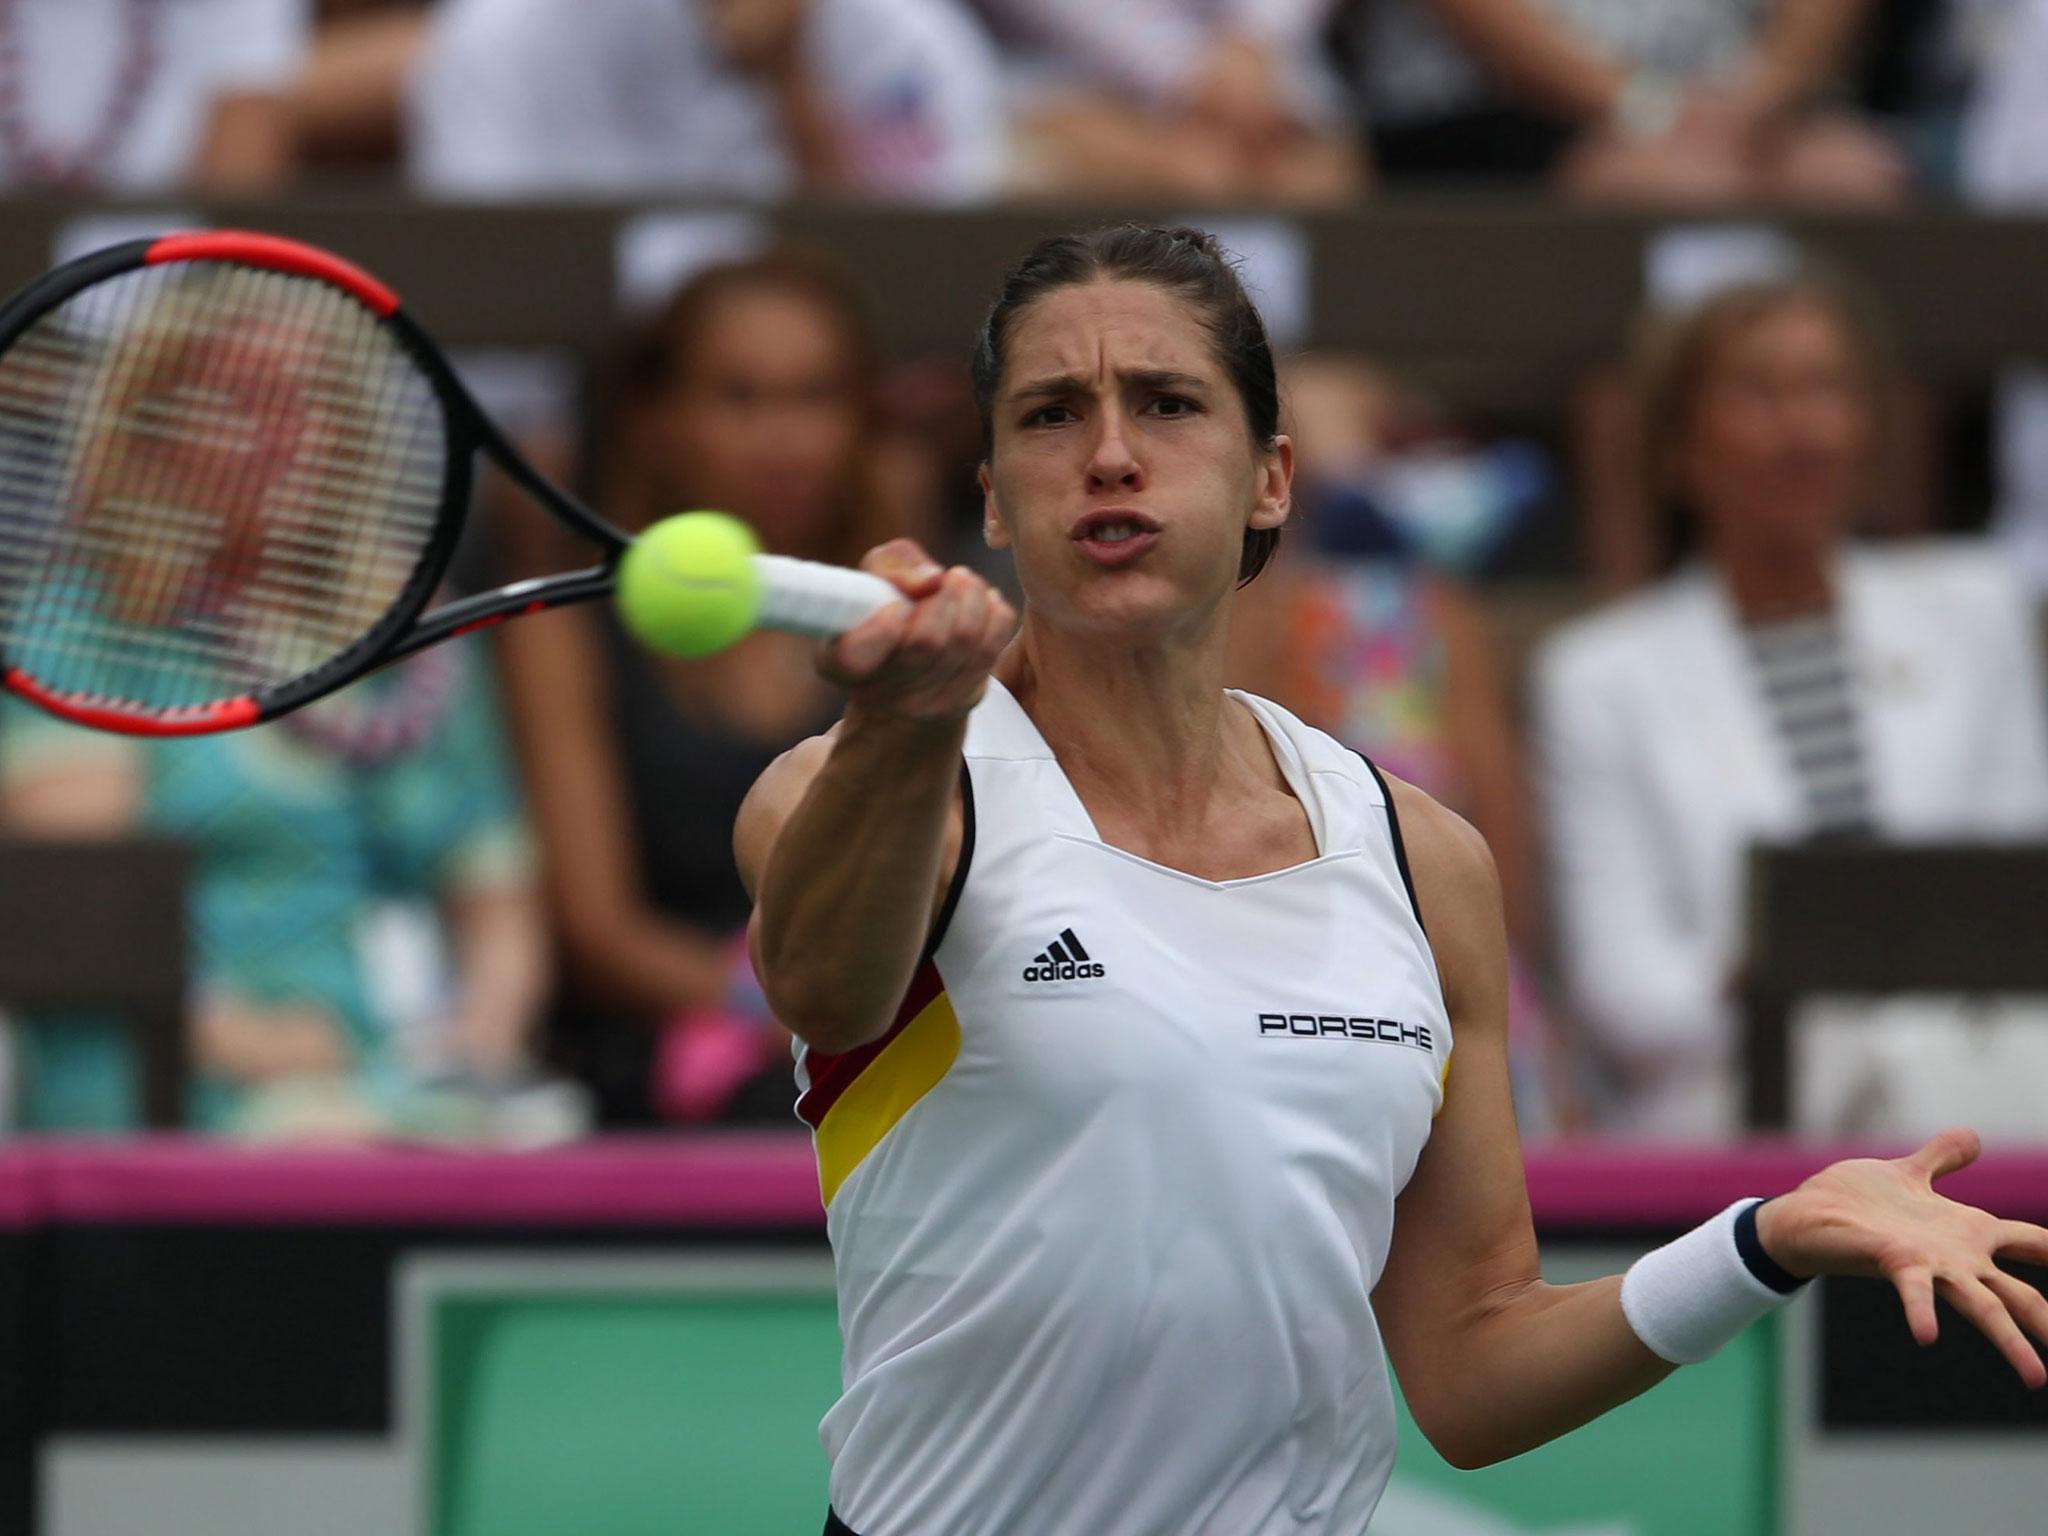 Andrea Petkovic described it as 'an absolute outrage and affront'